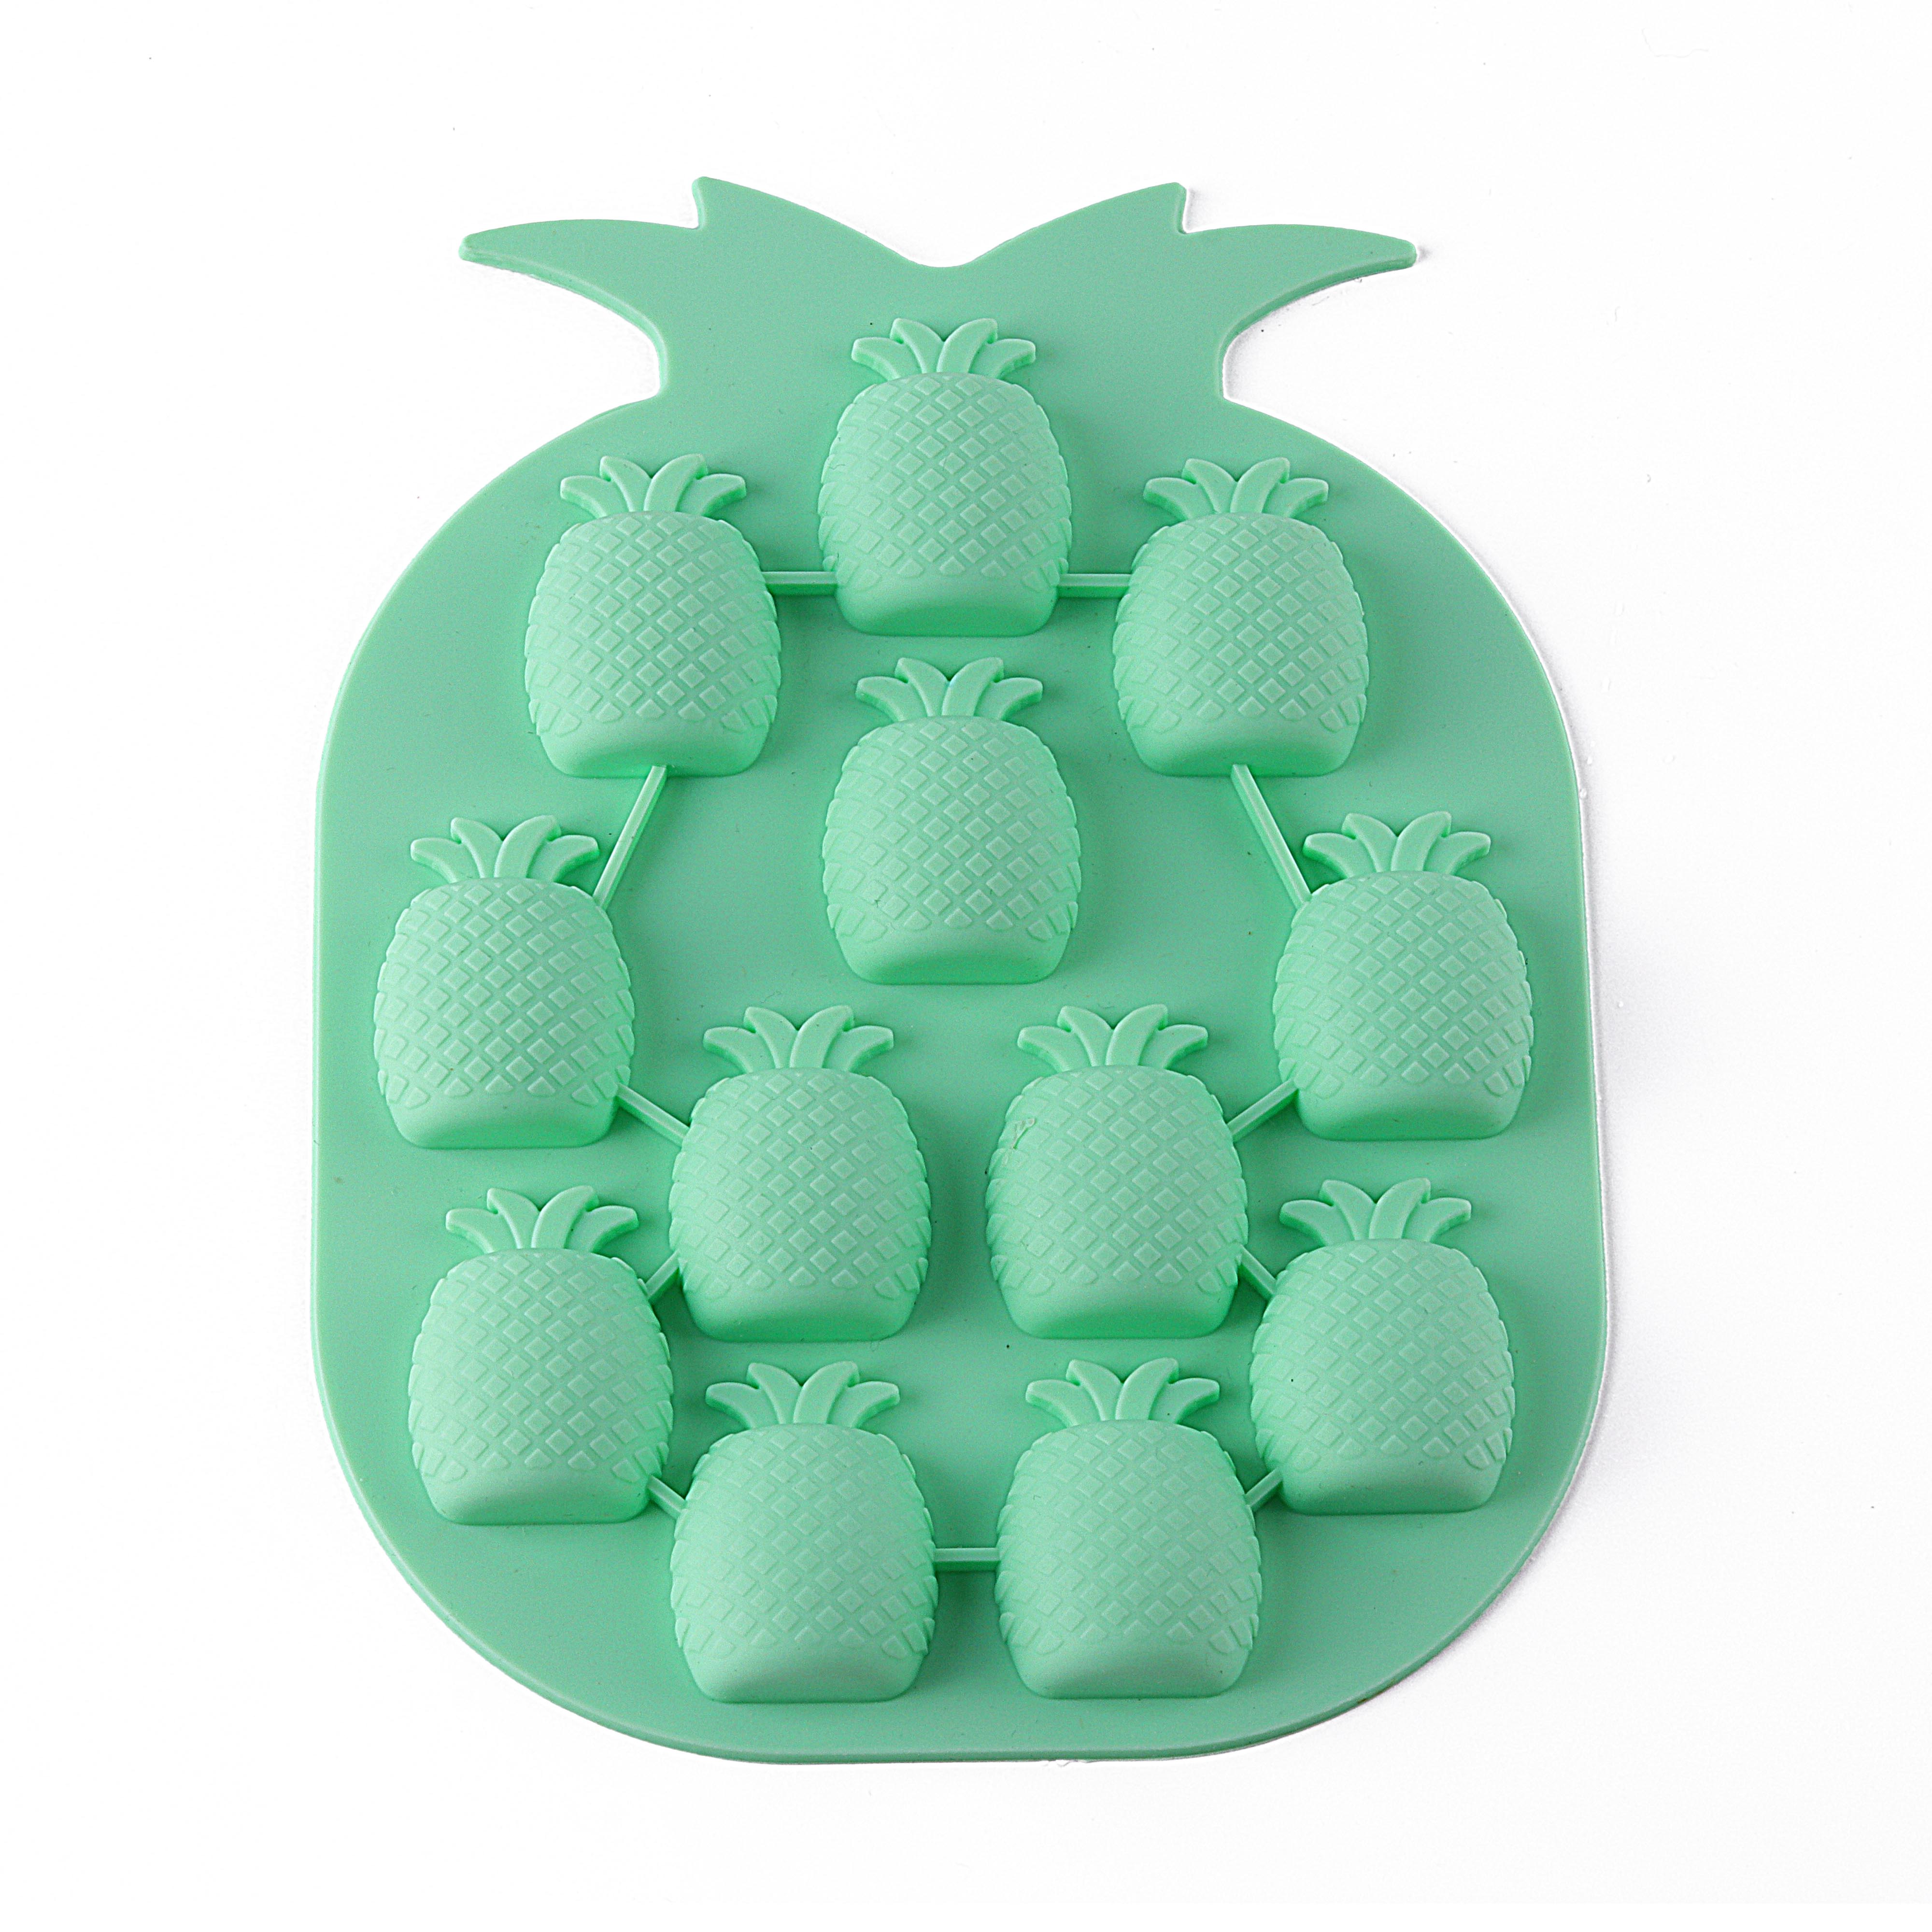 ODM customize silicone ice cube tray